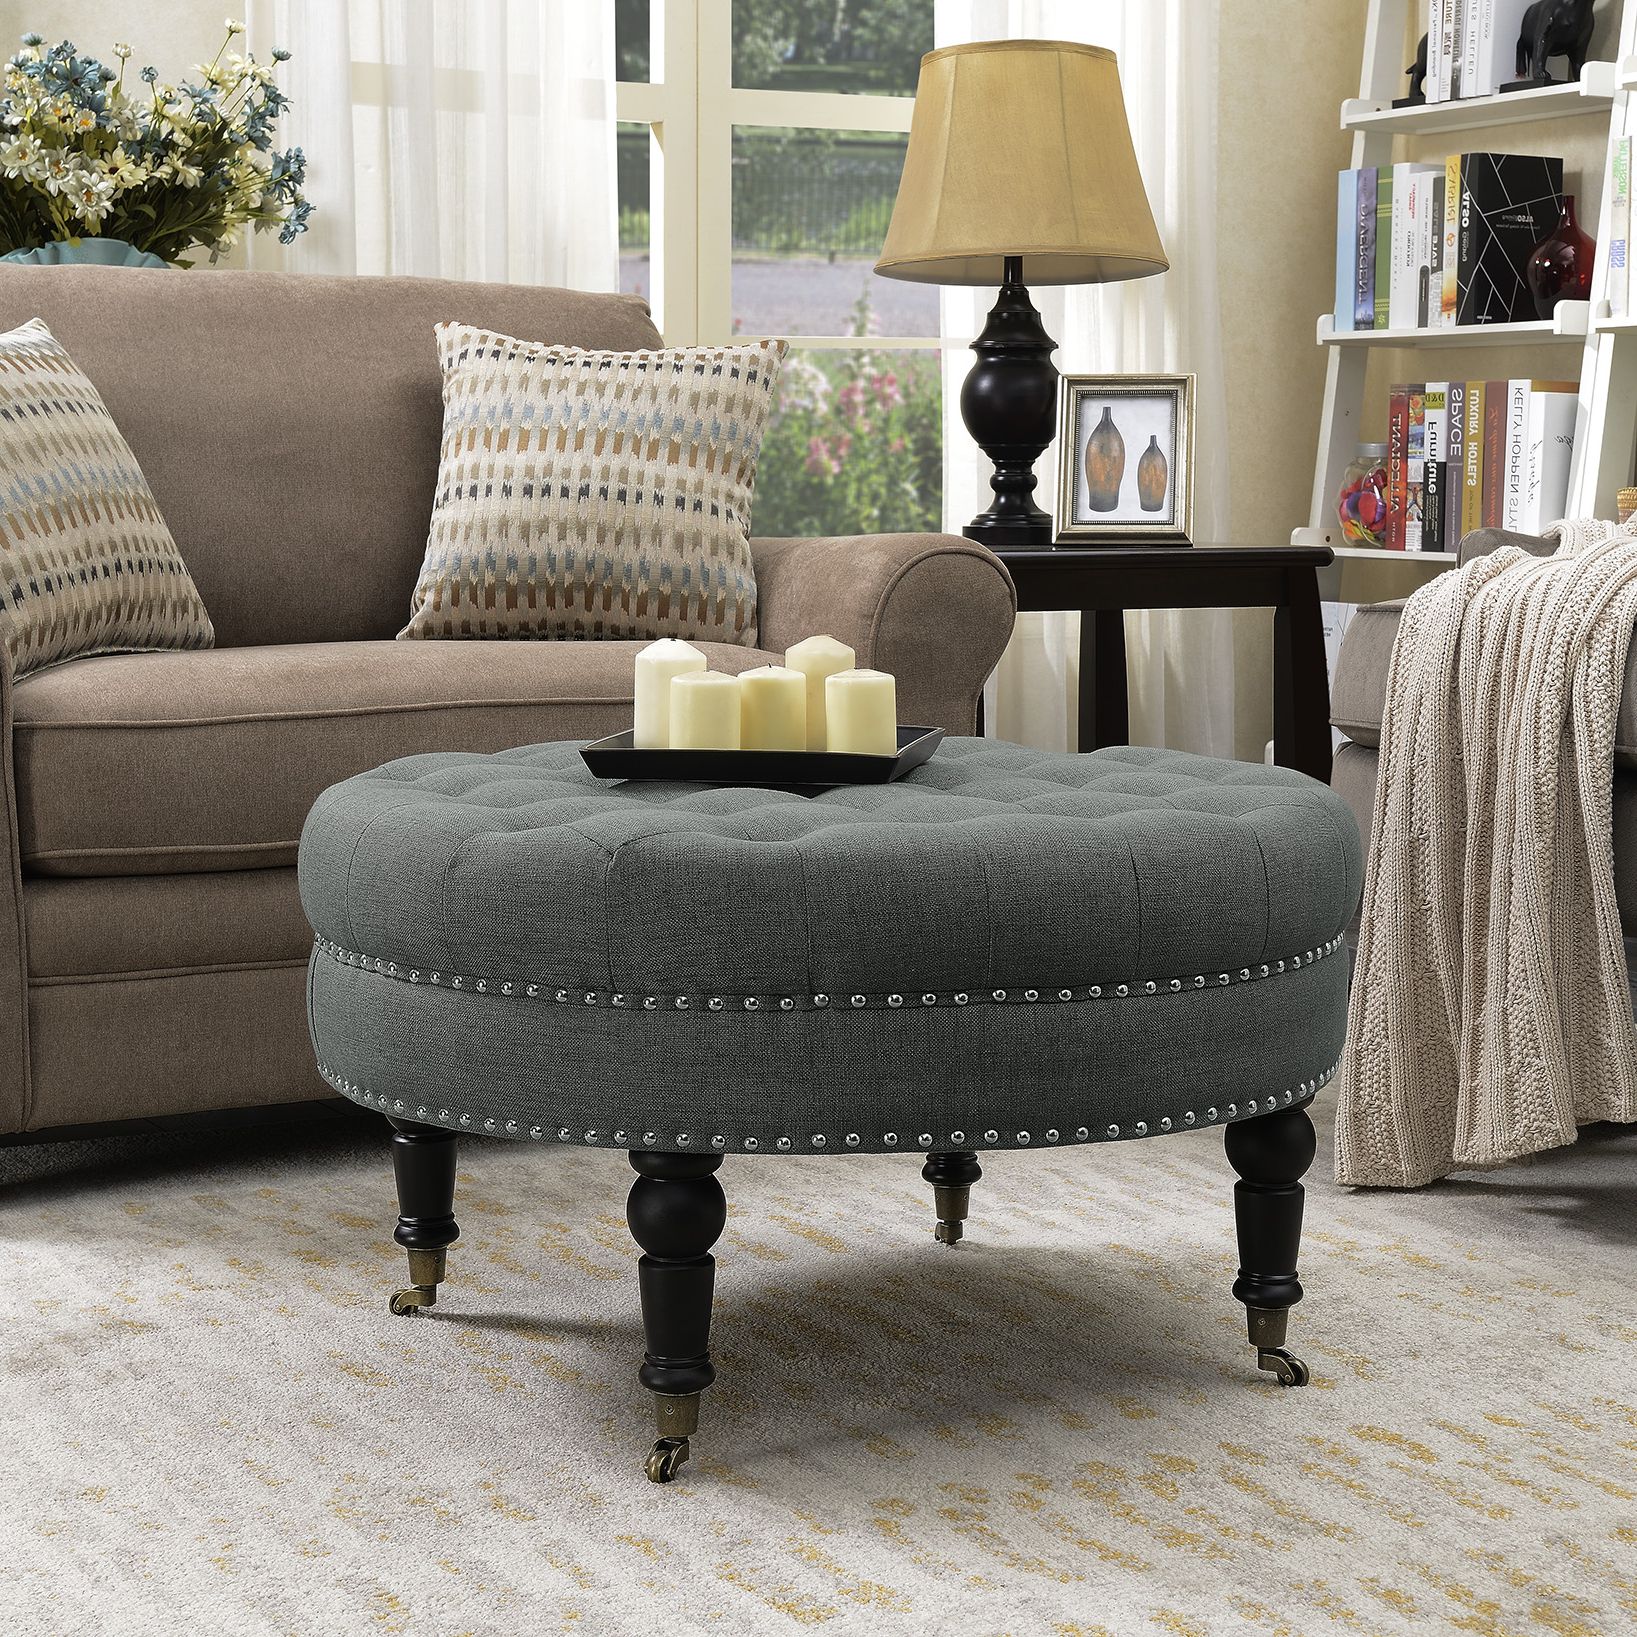 Gray Fabric Tufted Oval Ottomans Throughout Well Known Tufted Ottoman Round Room Indoor Home Decor Seating Coffee Table (gray (View 6 of 10)